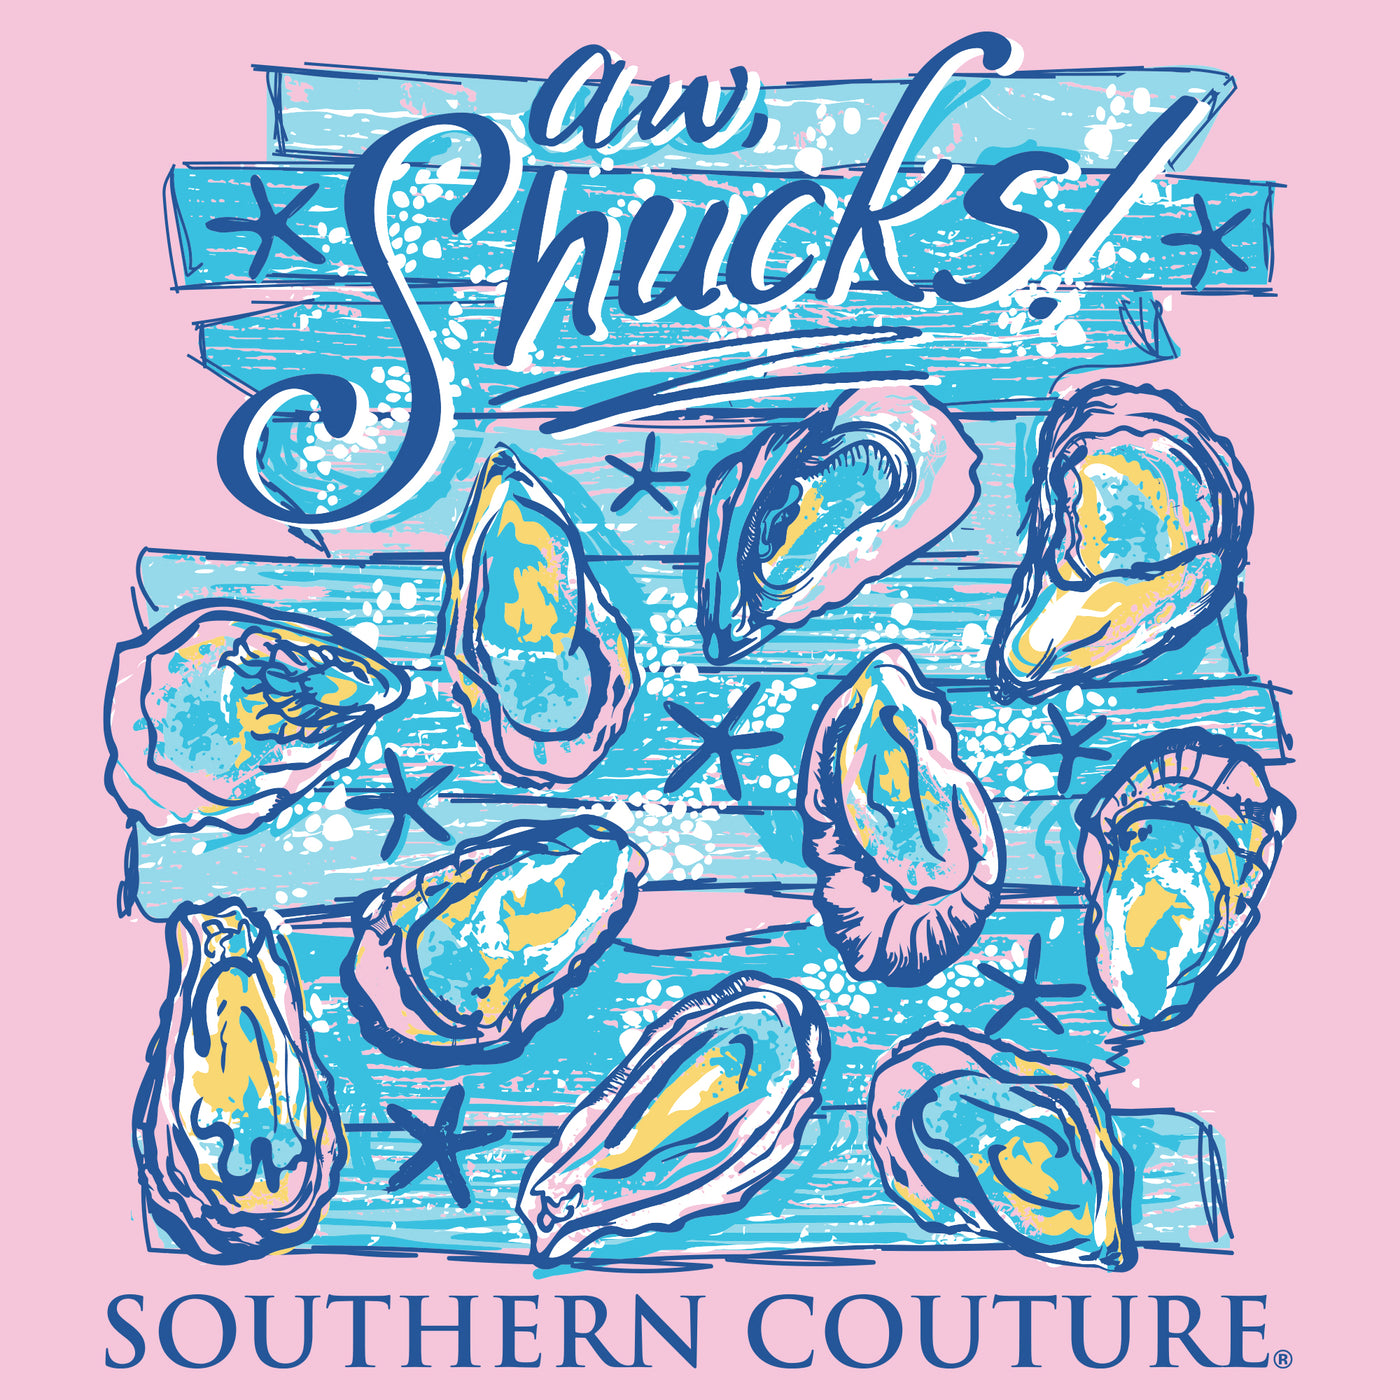 Southern Couture Aw Shucks Blossom SS